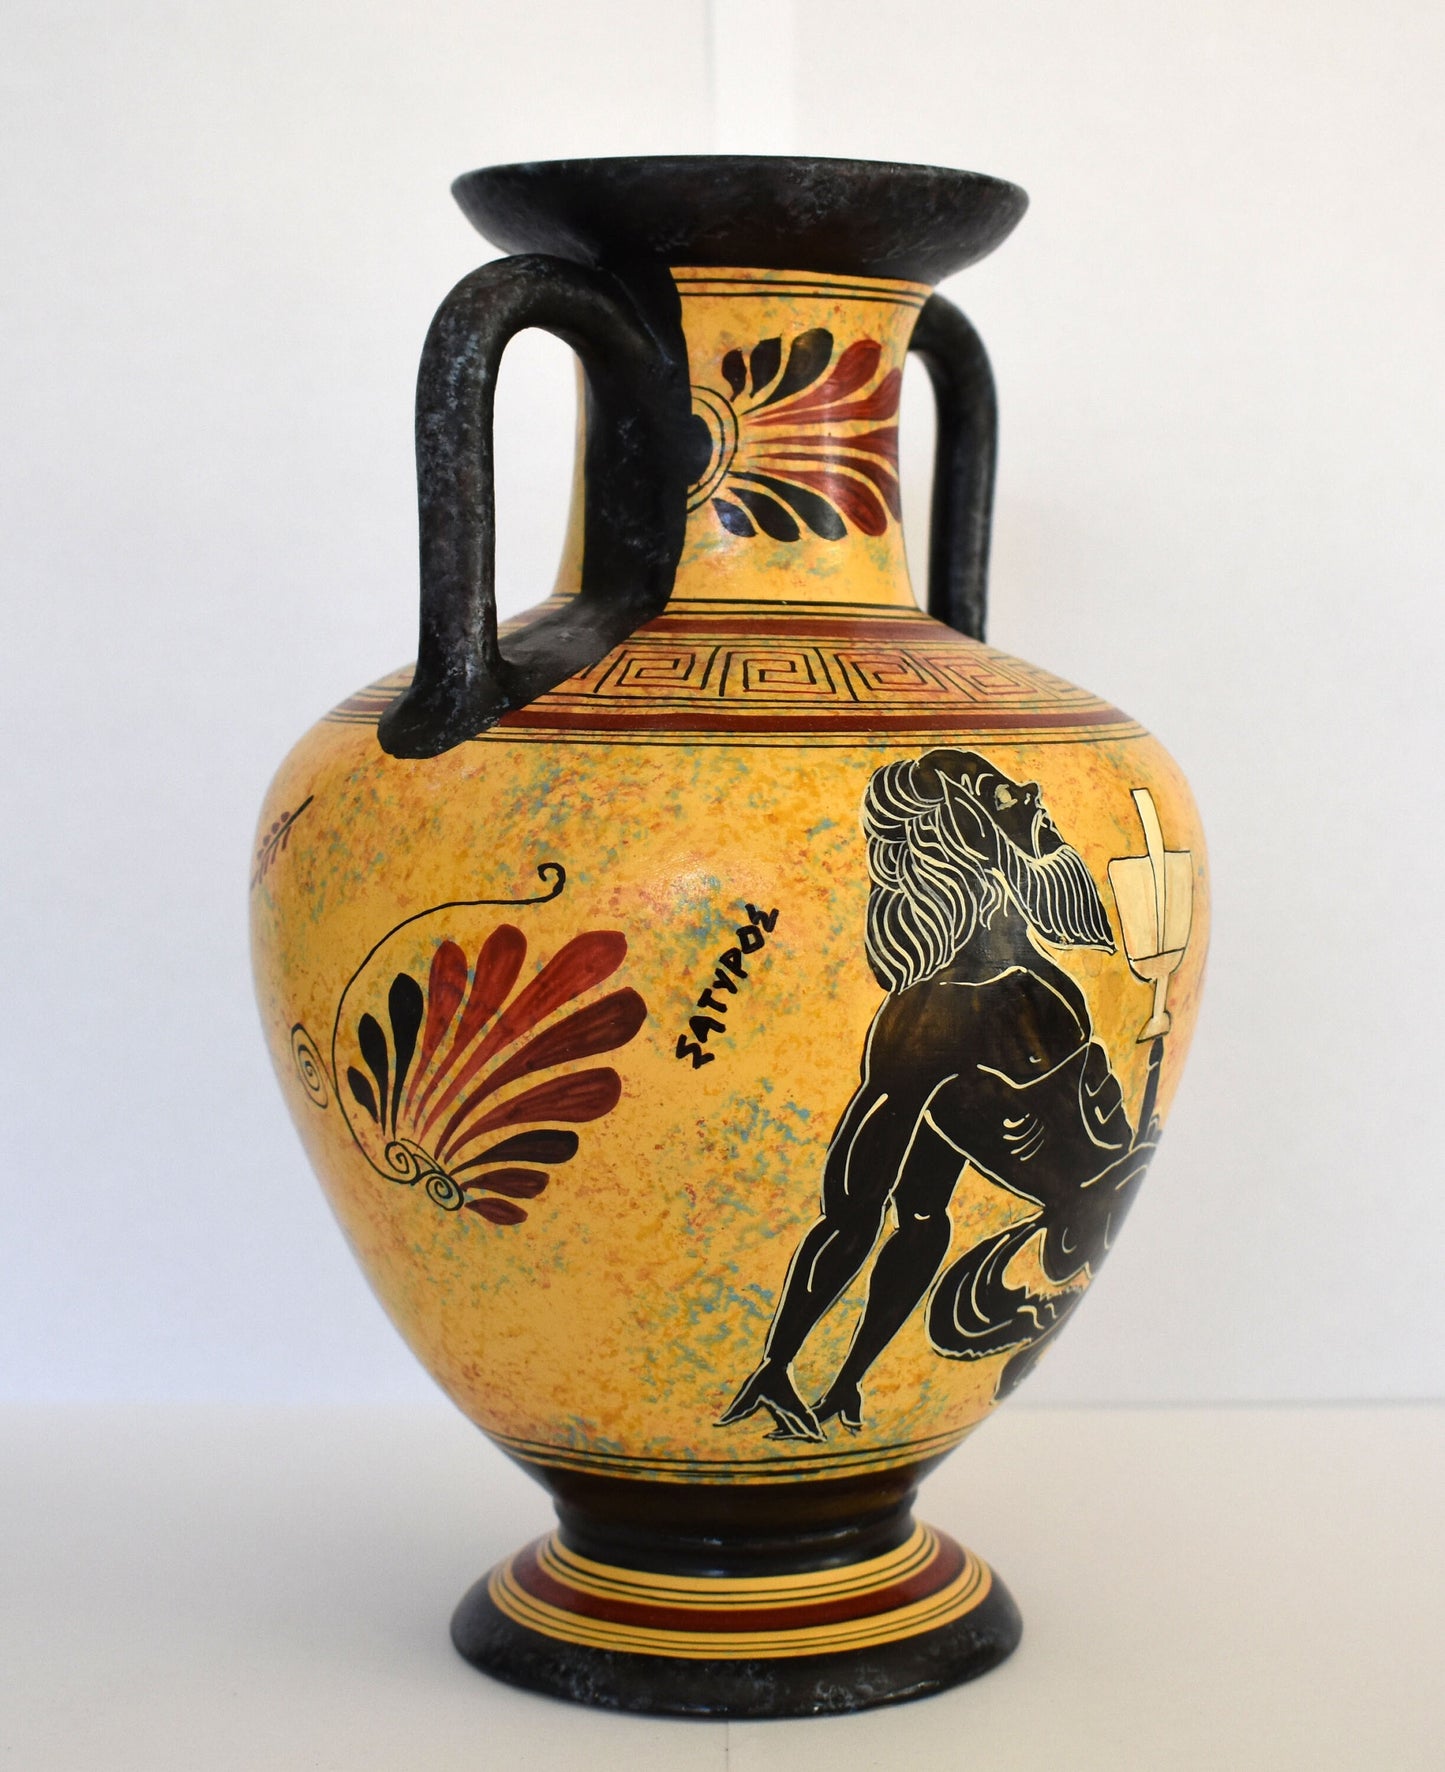 Satyr - Male Nature Spirit - Athenian Couple in Love - Sex is Never Enough - Ceramic Vase